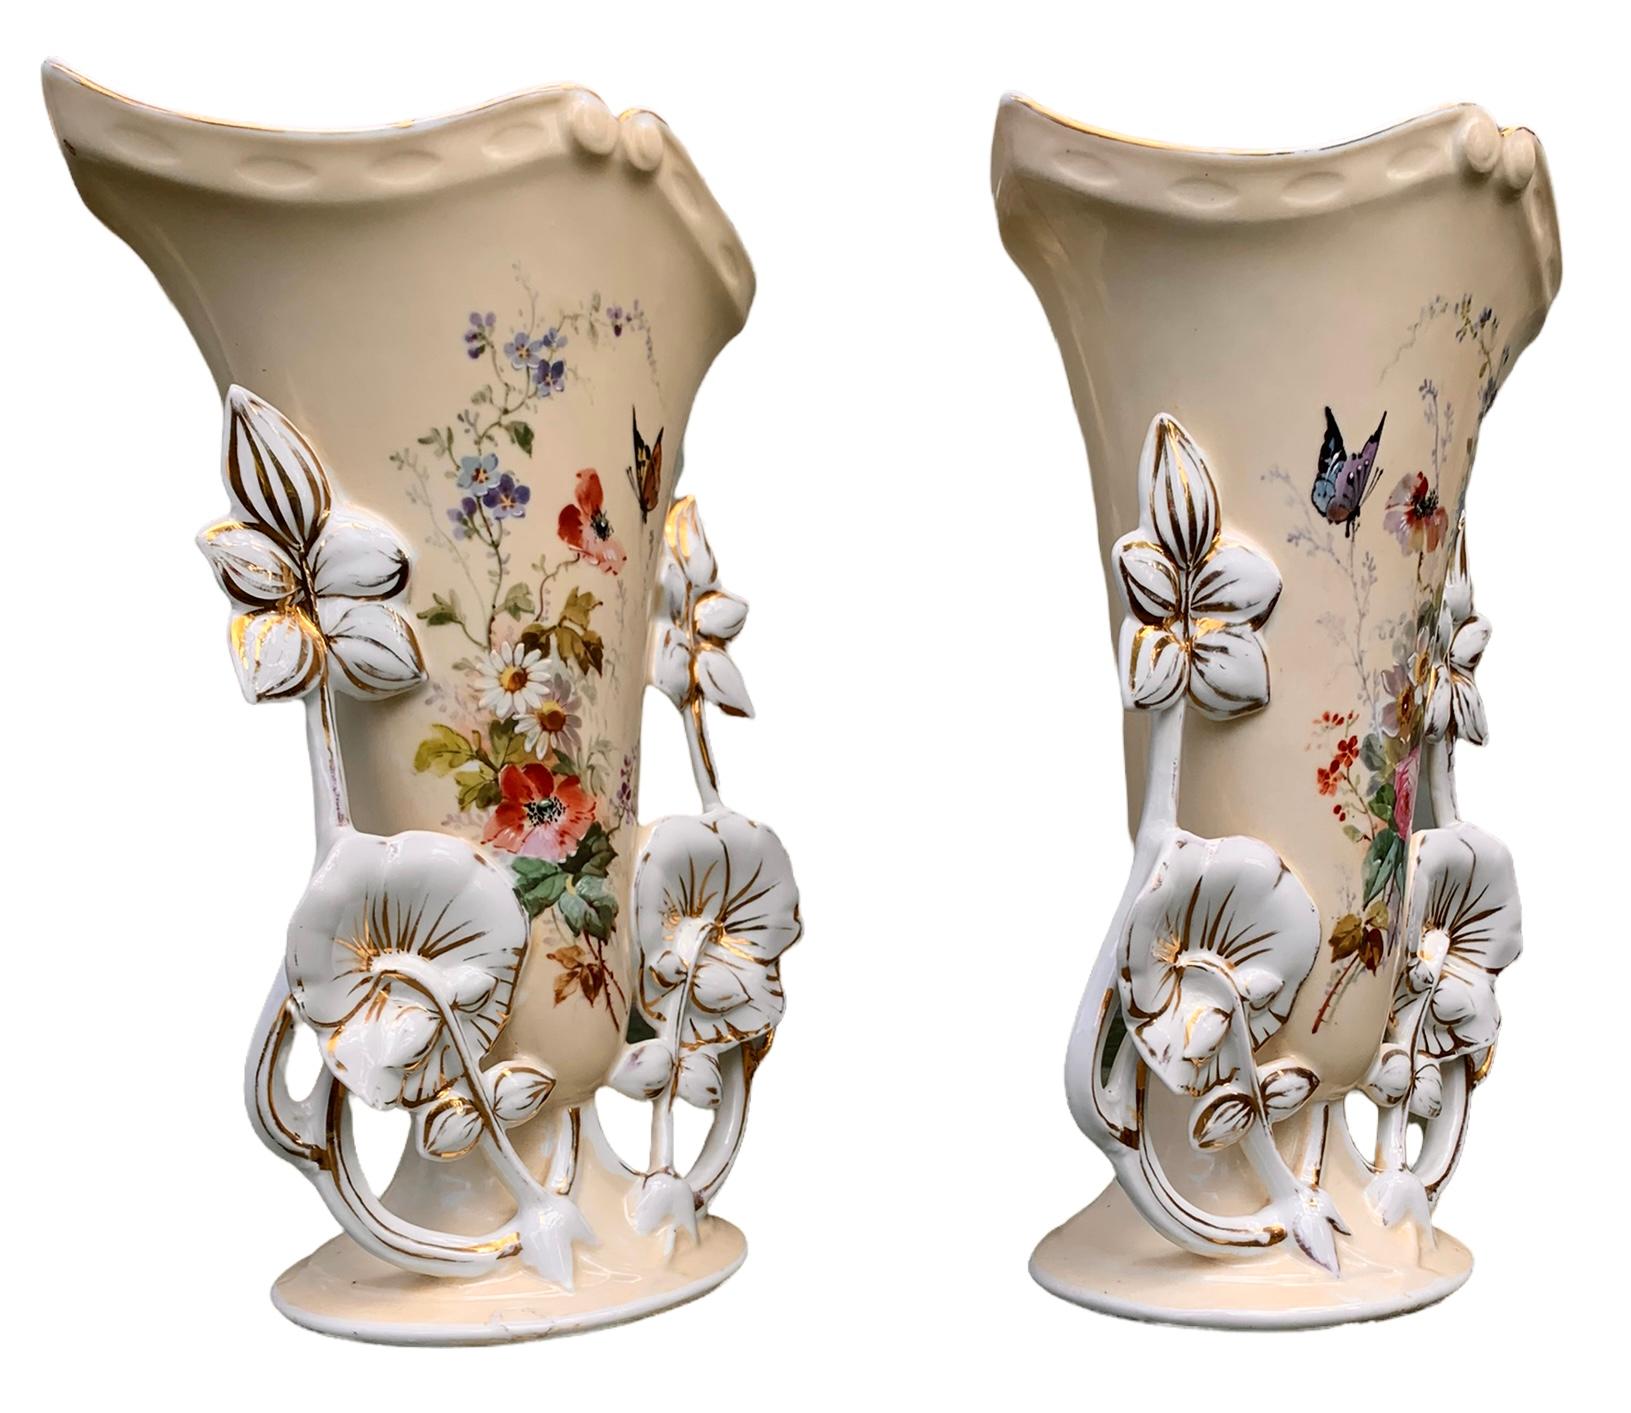 A superb pair of Old Paris porcelain garniture vases having lovely enameled, hand painted floral studies on a pale beige background and with gilt decoration. These are circa 1850. 

These exquisite vases would be lovely on your favorite mantle,